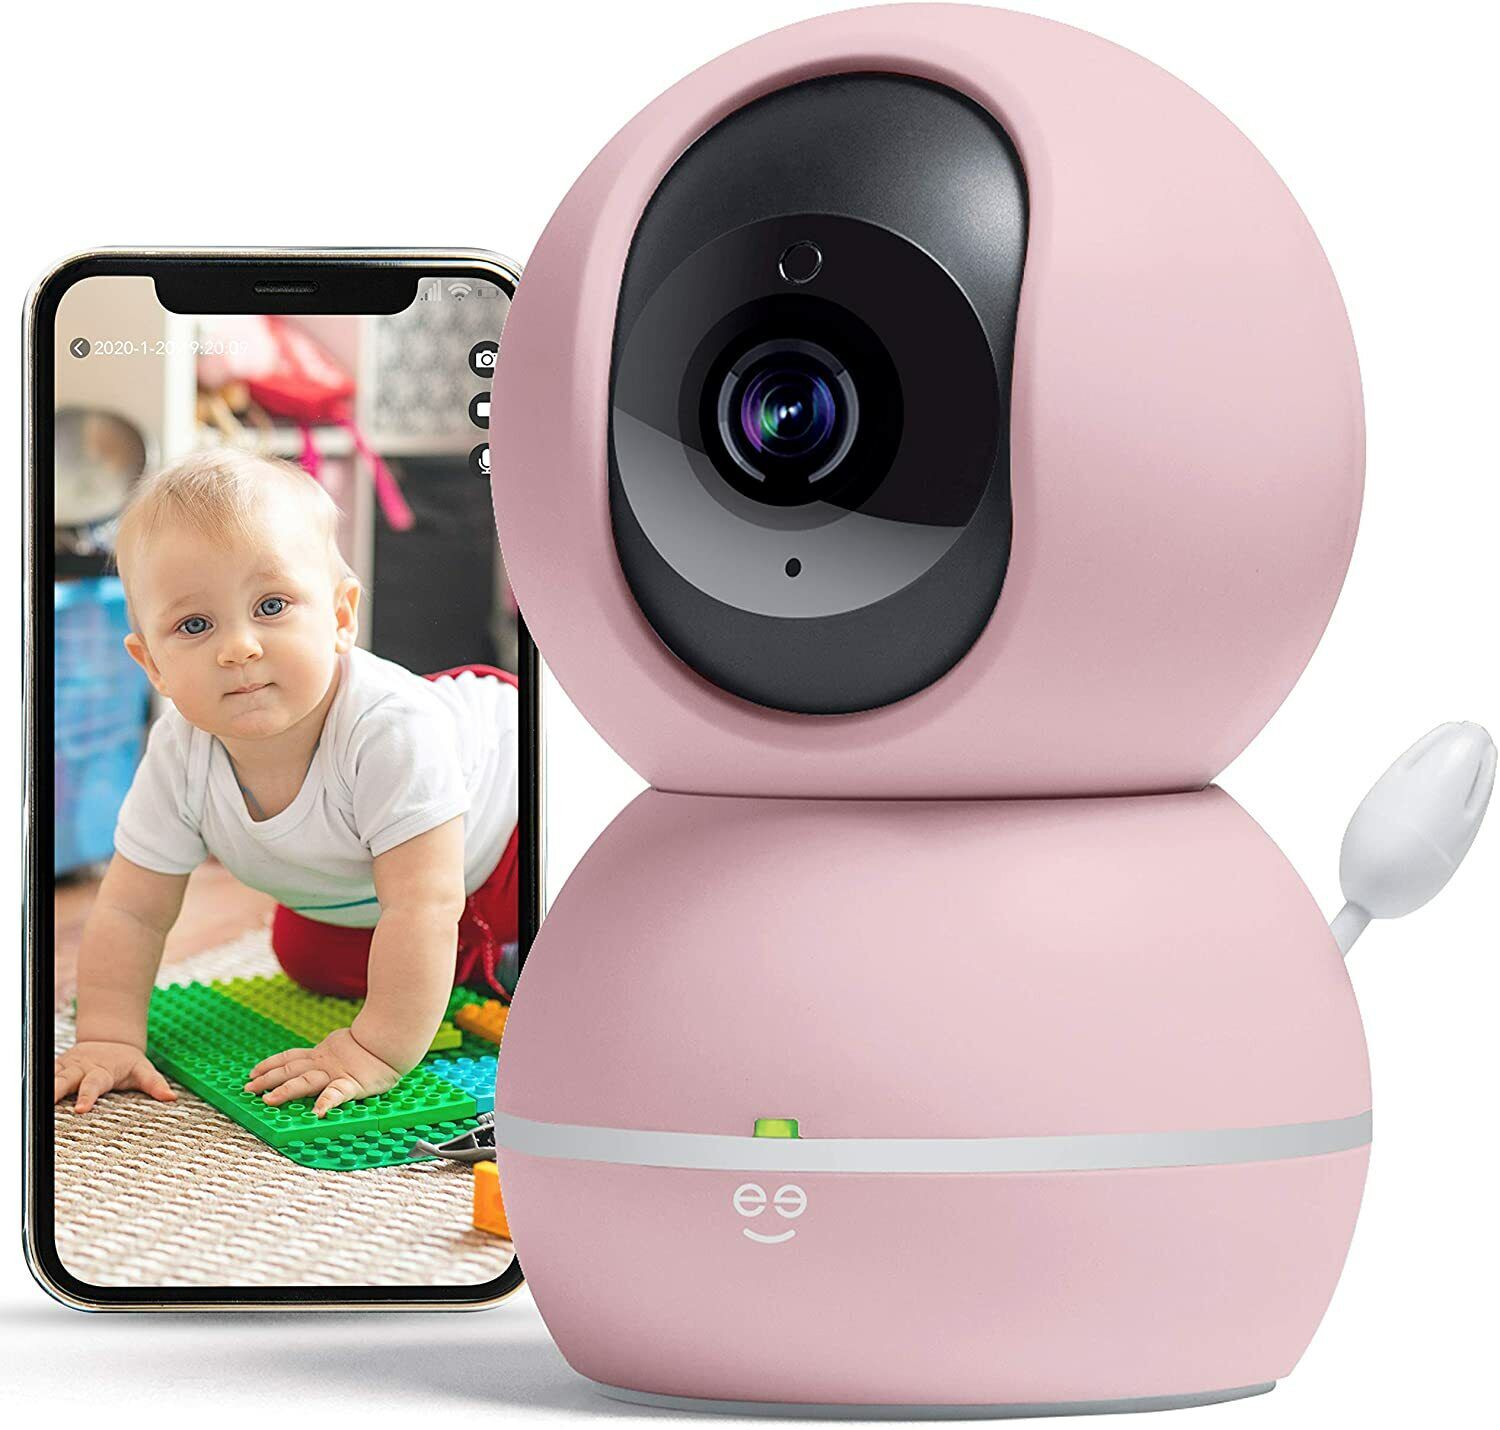 Geeni 1080p WiFi Security Camera Pet & Baby Monitor with Alexa Google Voice Cont